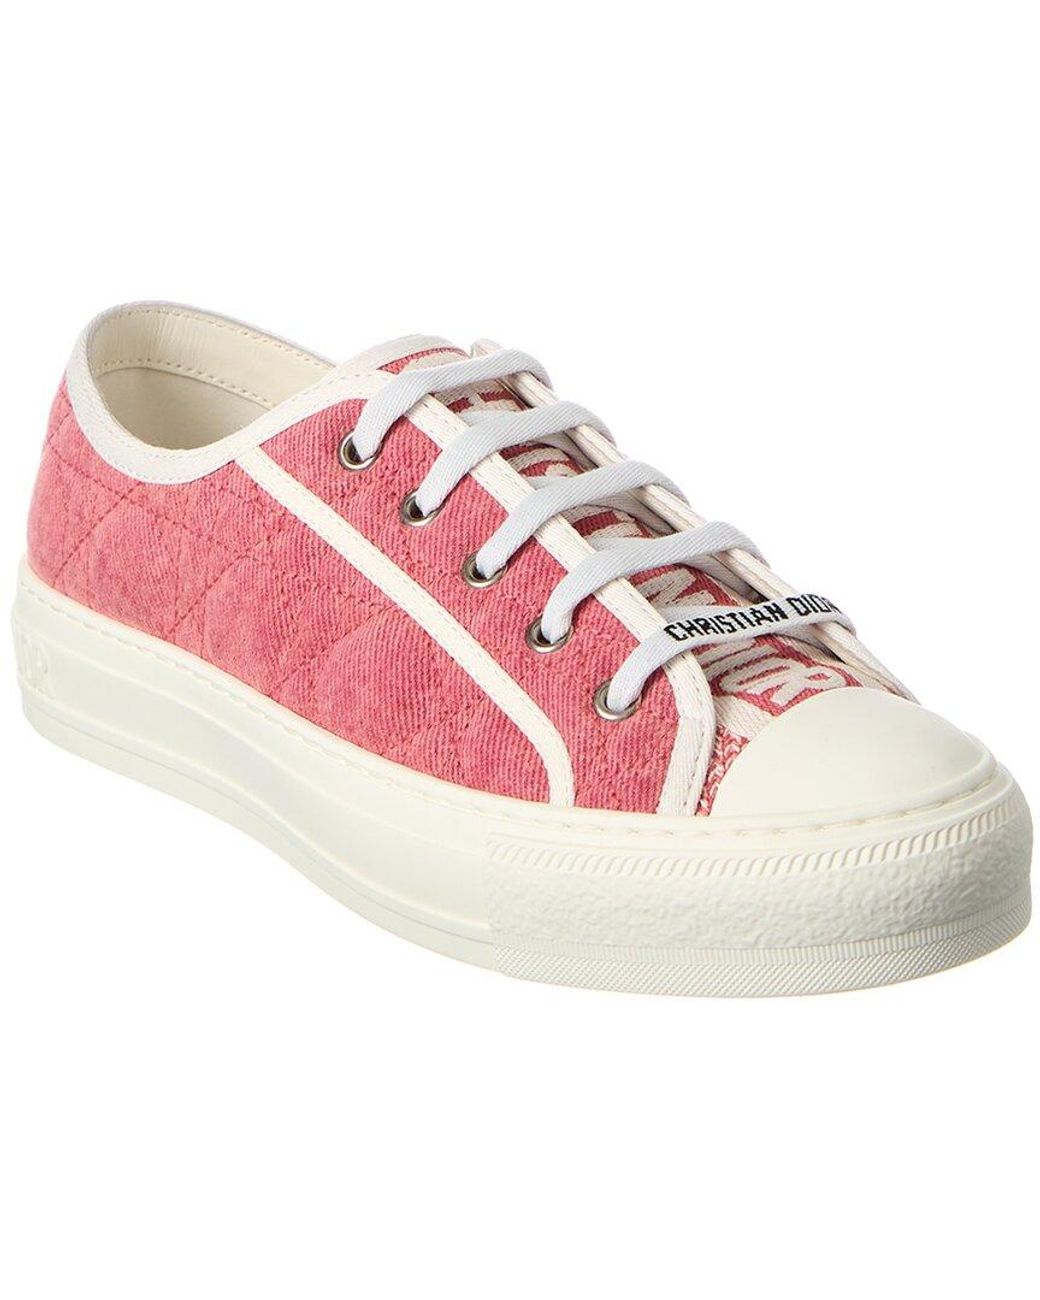 Christian Dior Women's Walk'N'Dior Sneakers Cannage Embroidered Canvas Pink  35